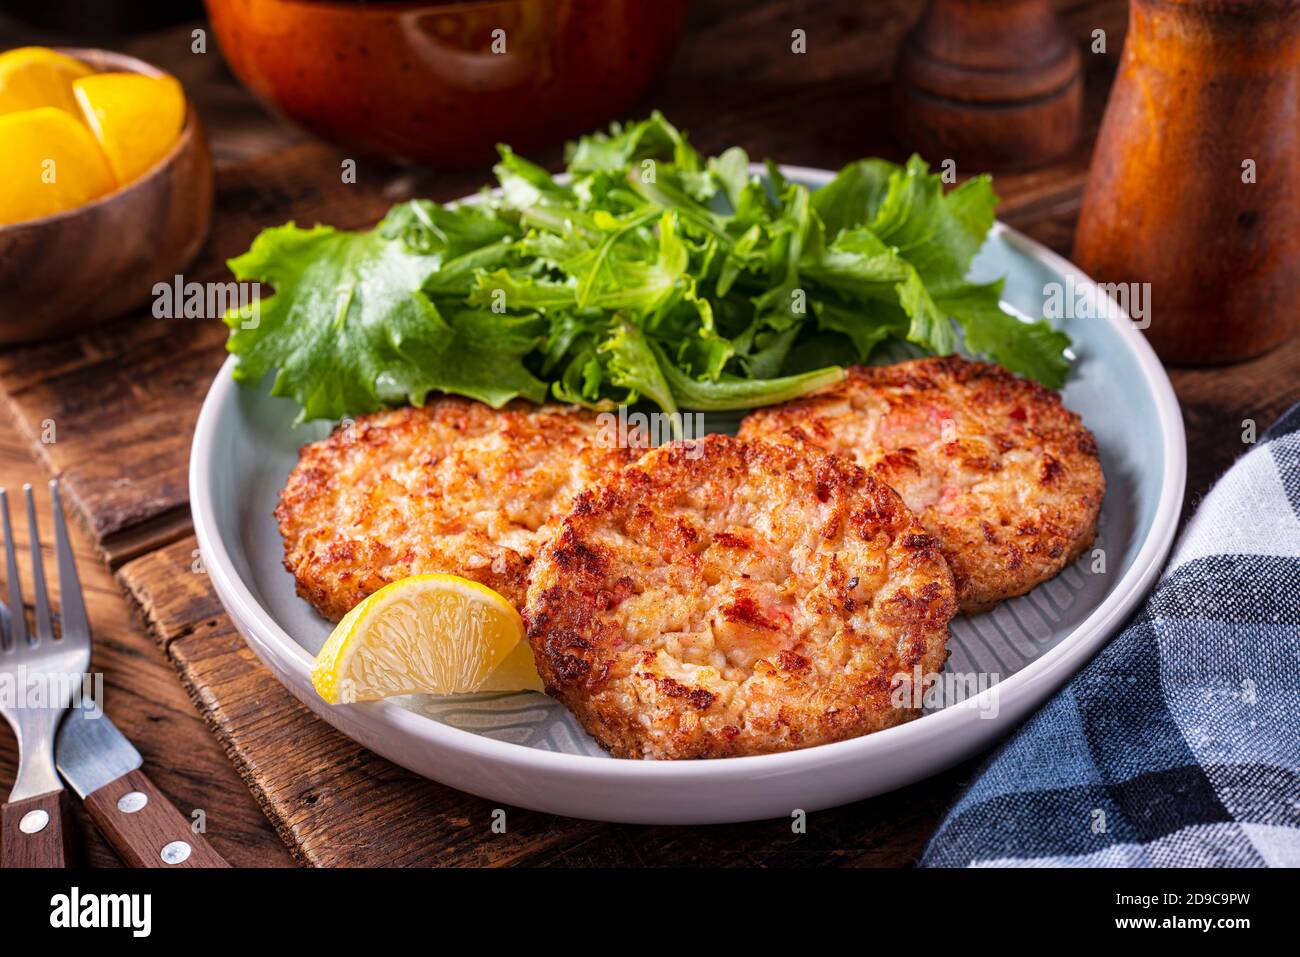 A plate of delicious crab cakes with spring mix salad and lemon garnish. Stock Photo